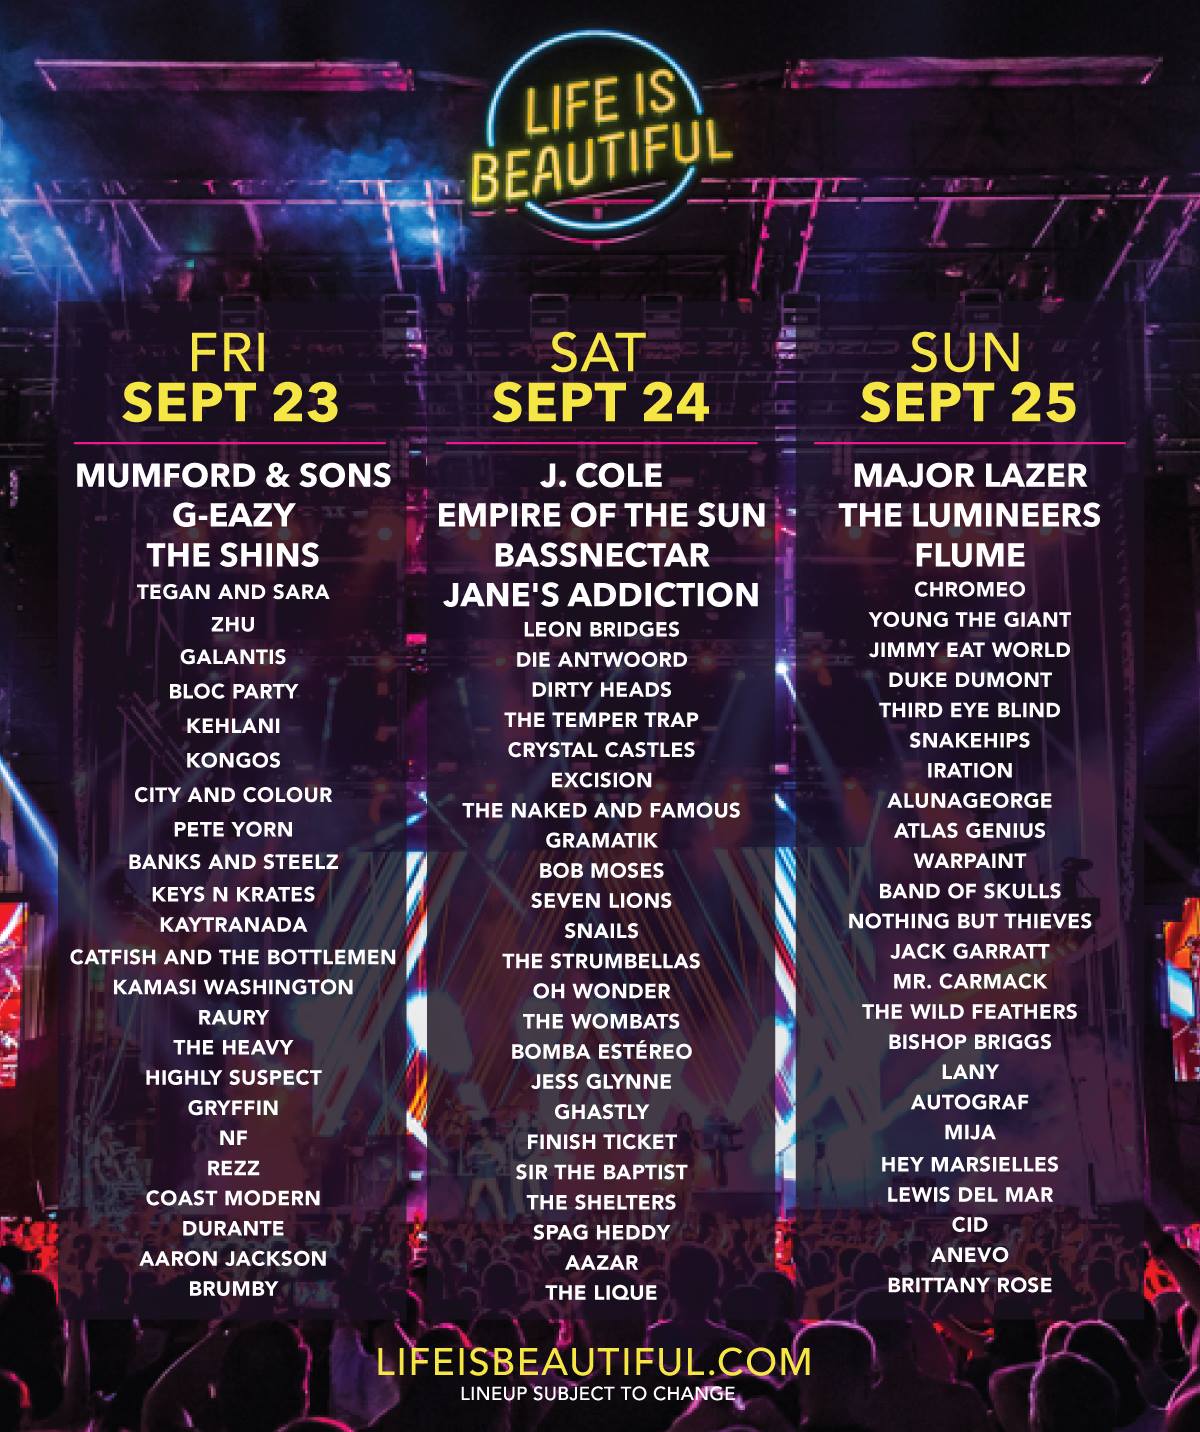 Life is Beautiful reveals daily artist lineup, releases single day